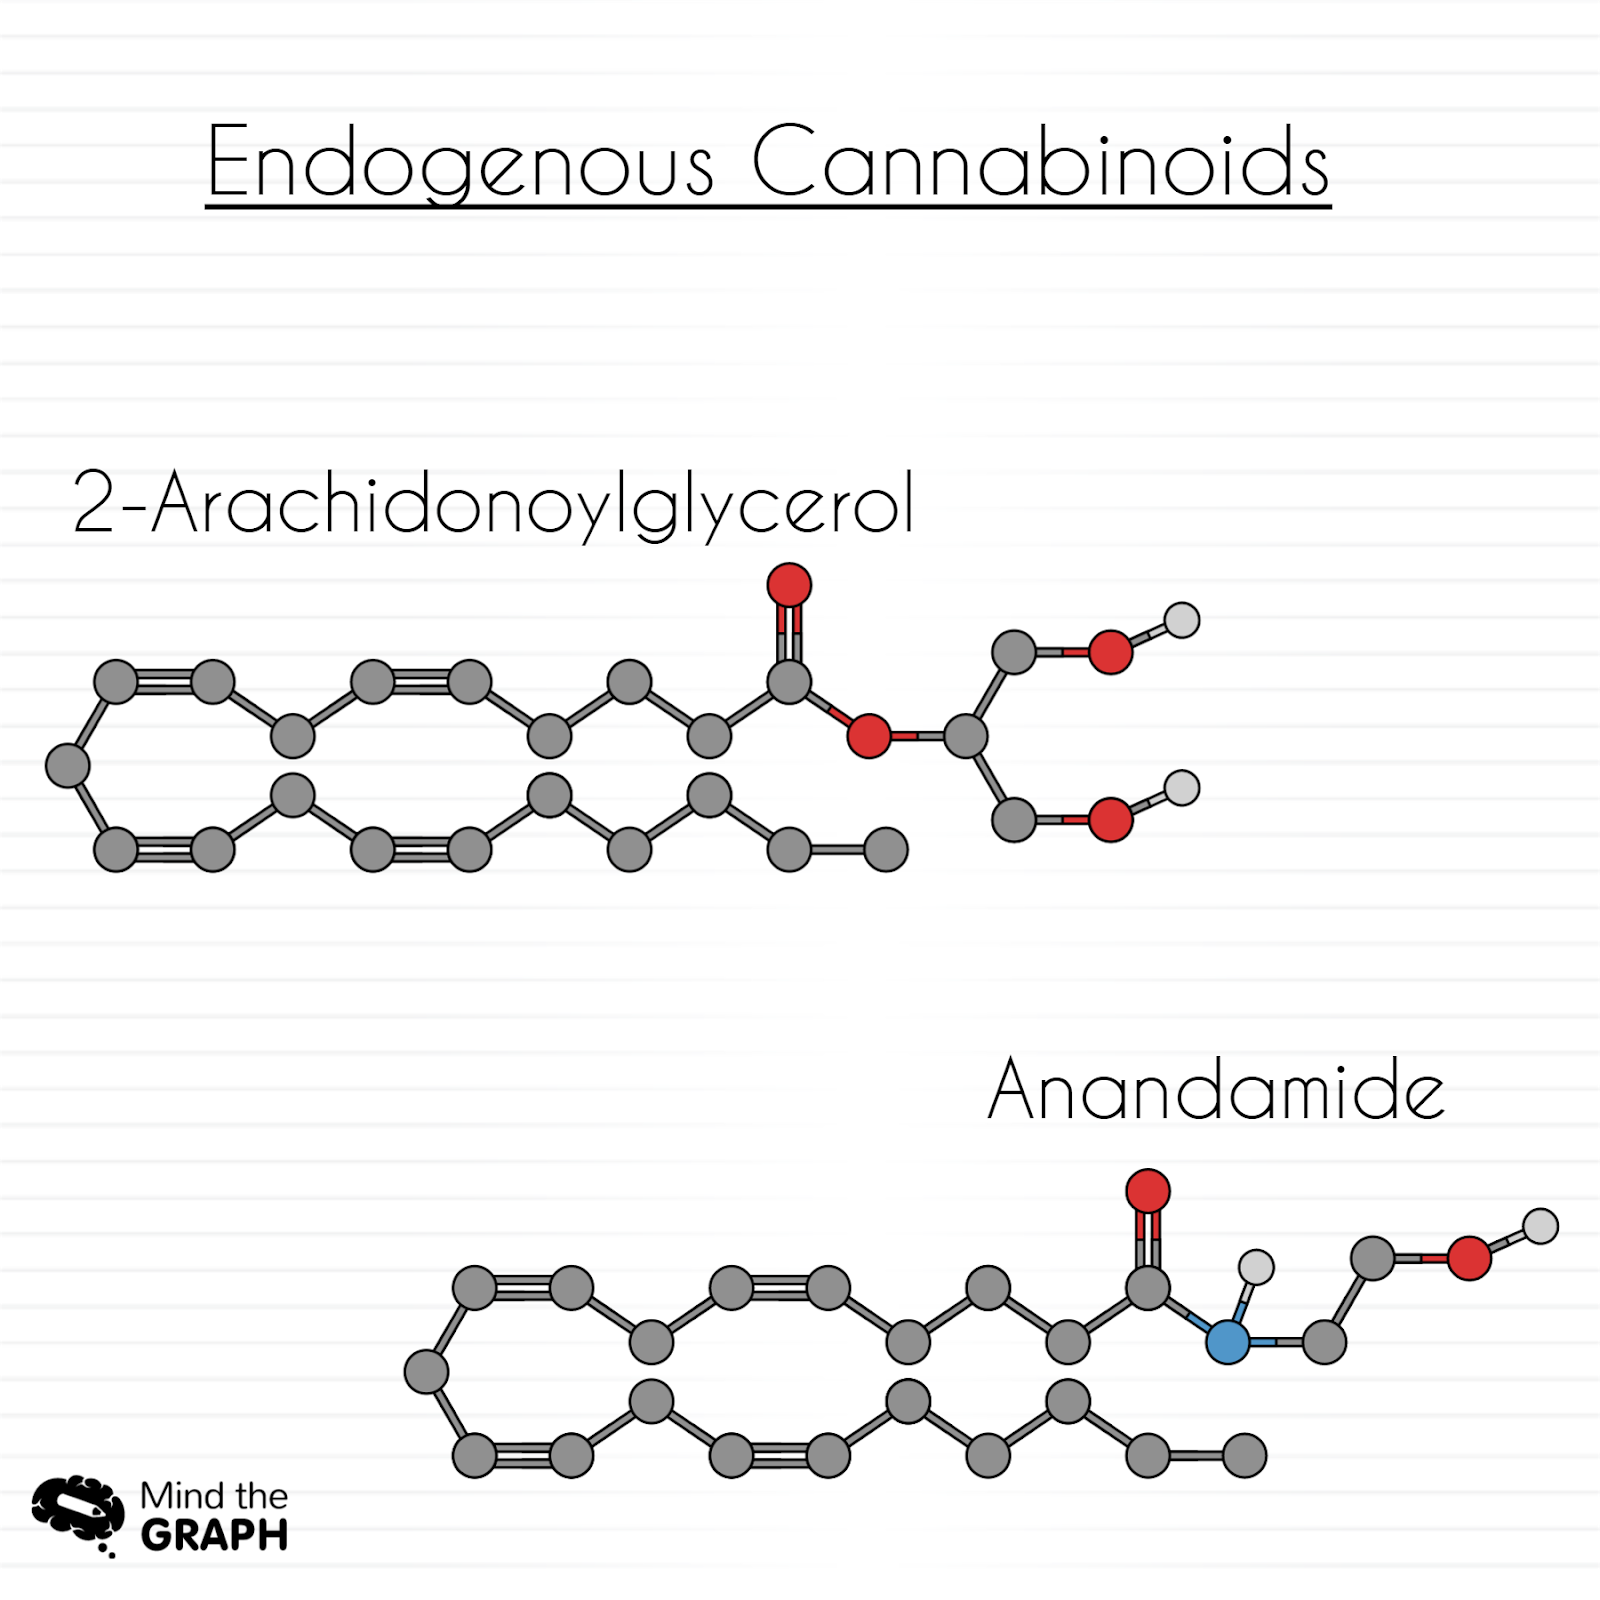 What is Anandamide and how does it work?